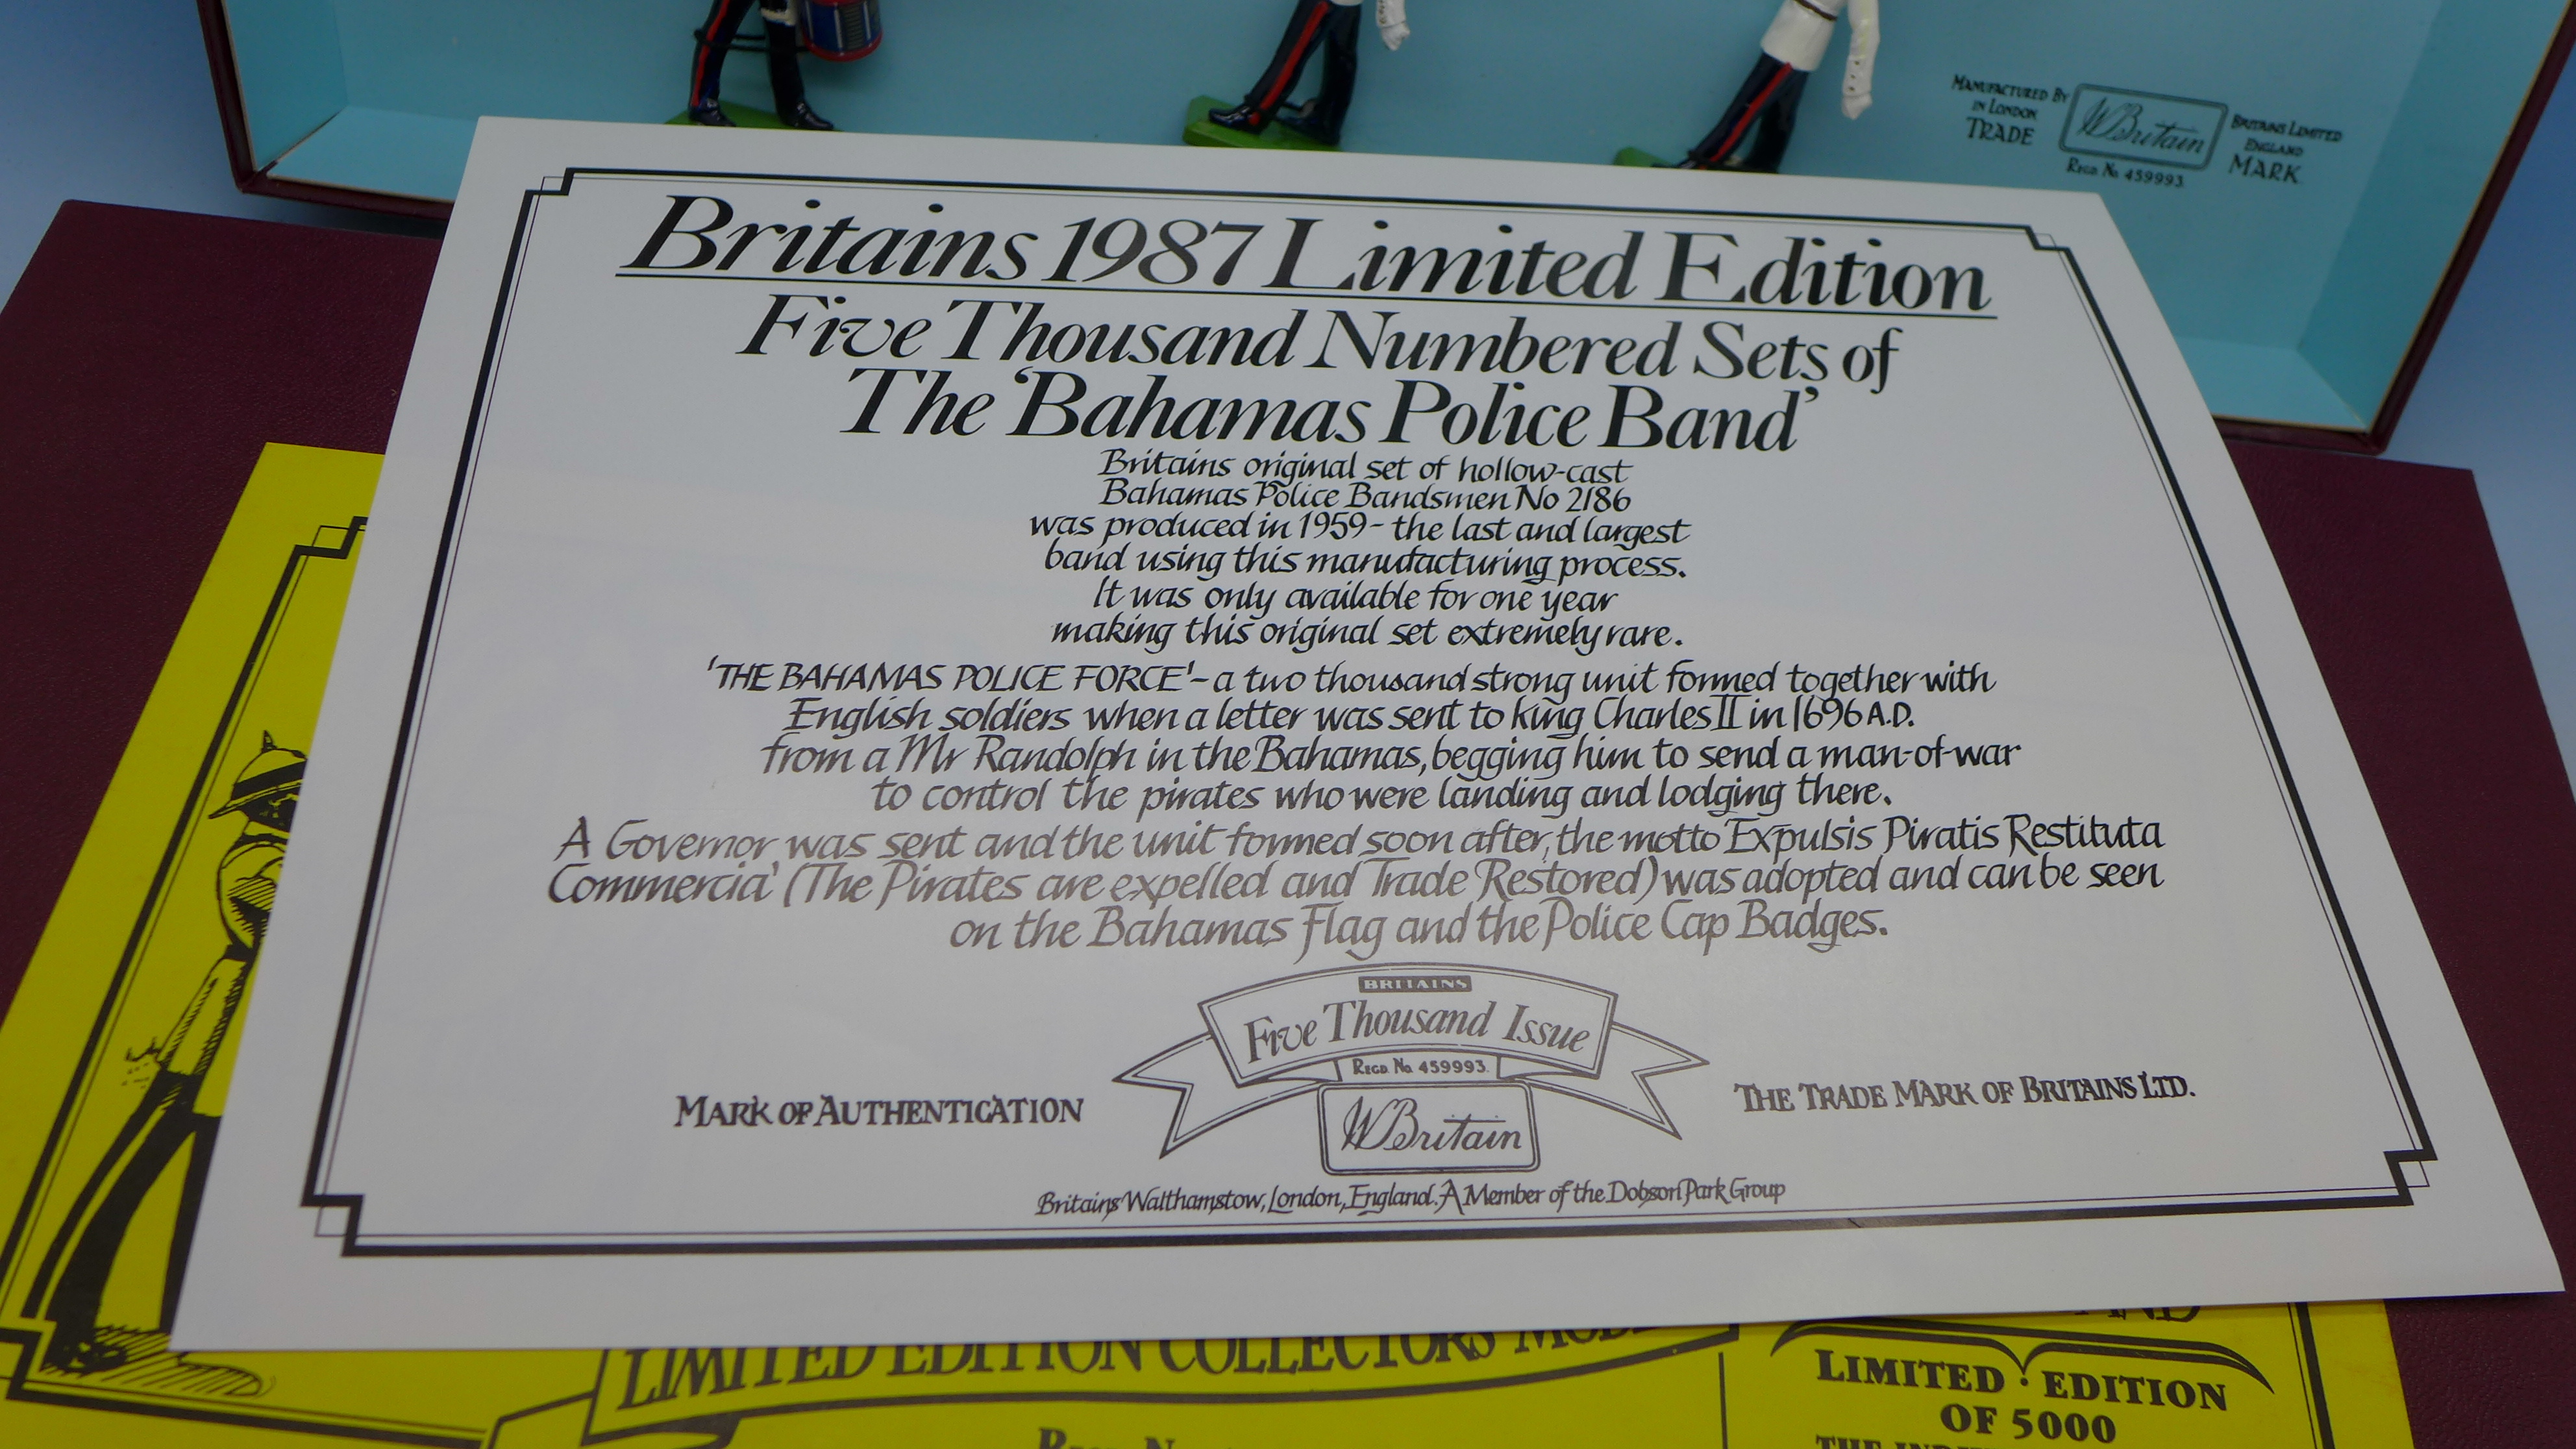 A Britains limited edition The Bahamas Police Band, - Image 5 of 5